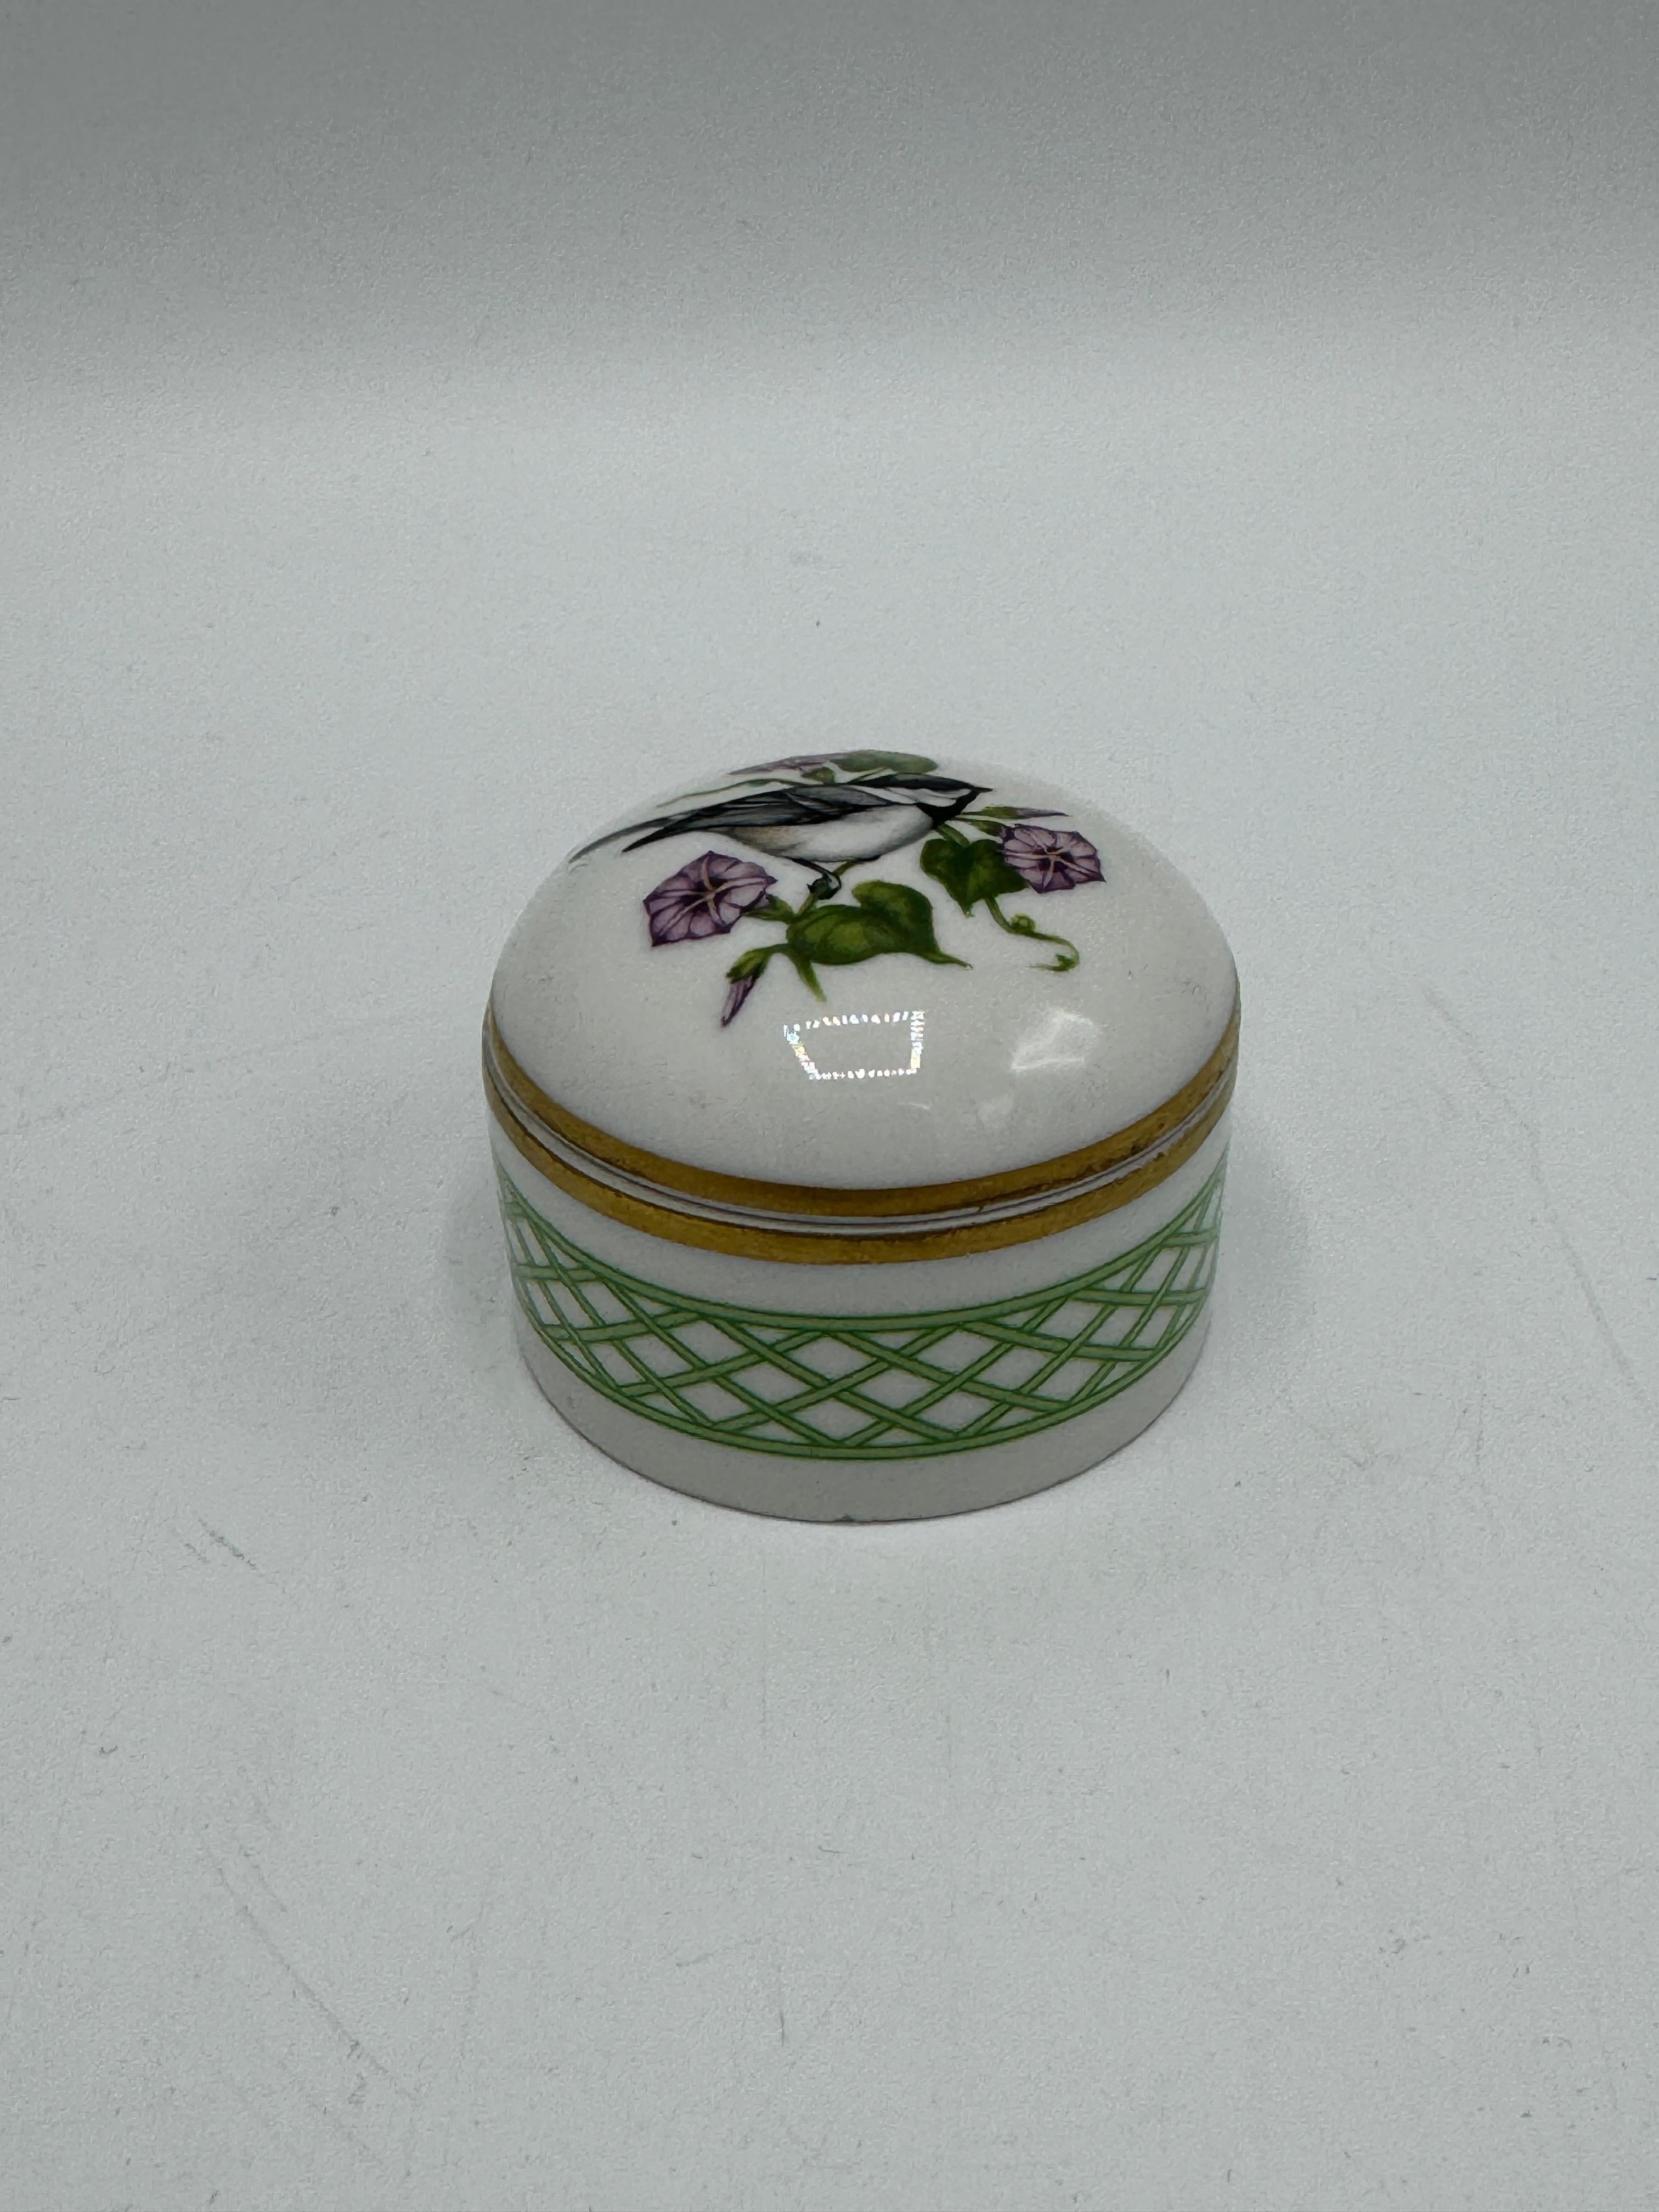 Offered is a beautiful, Early 21st Century, Limoges porcelain box from 